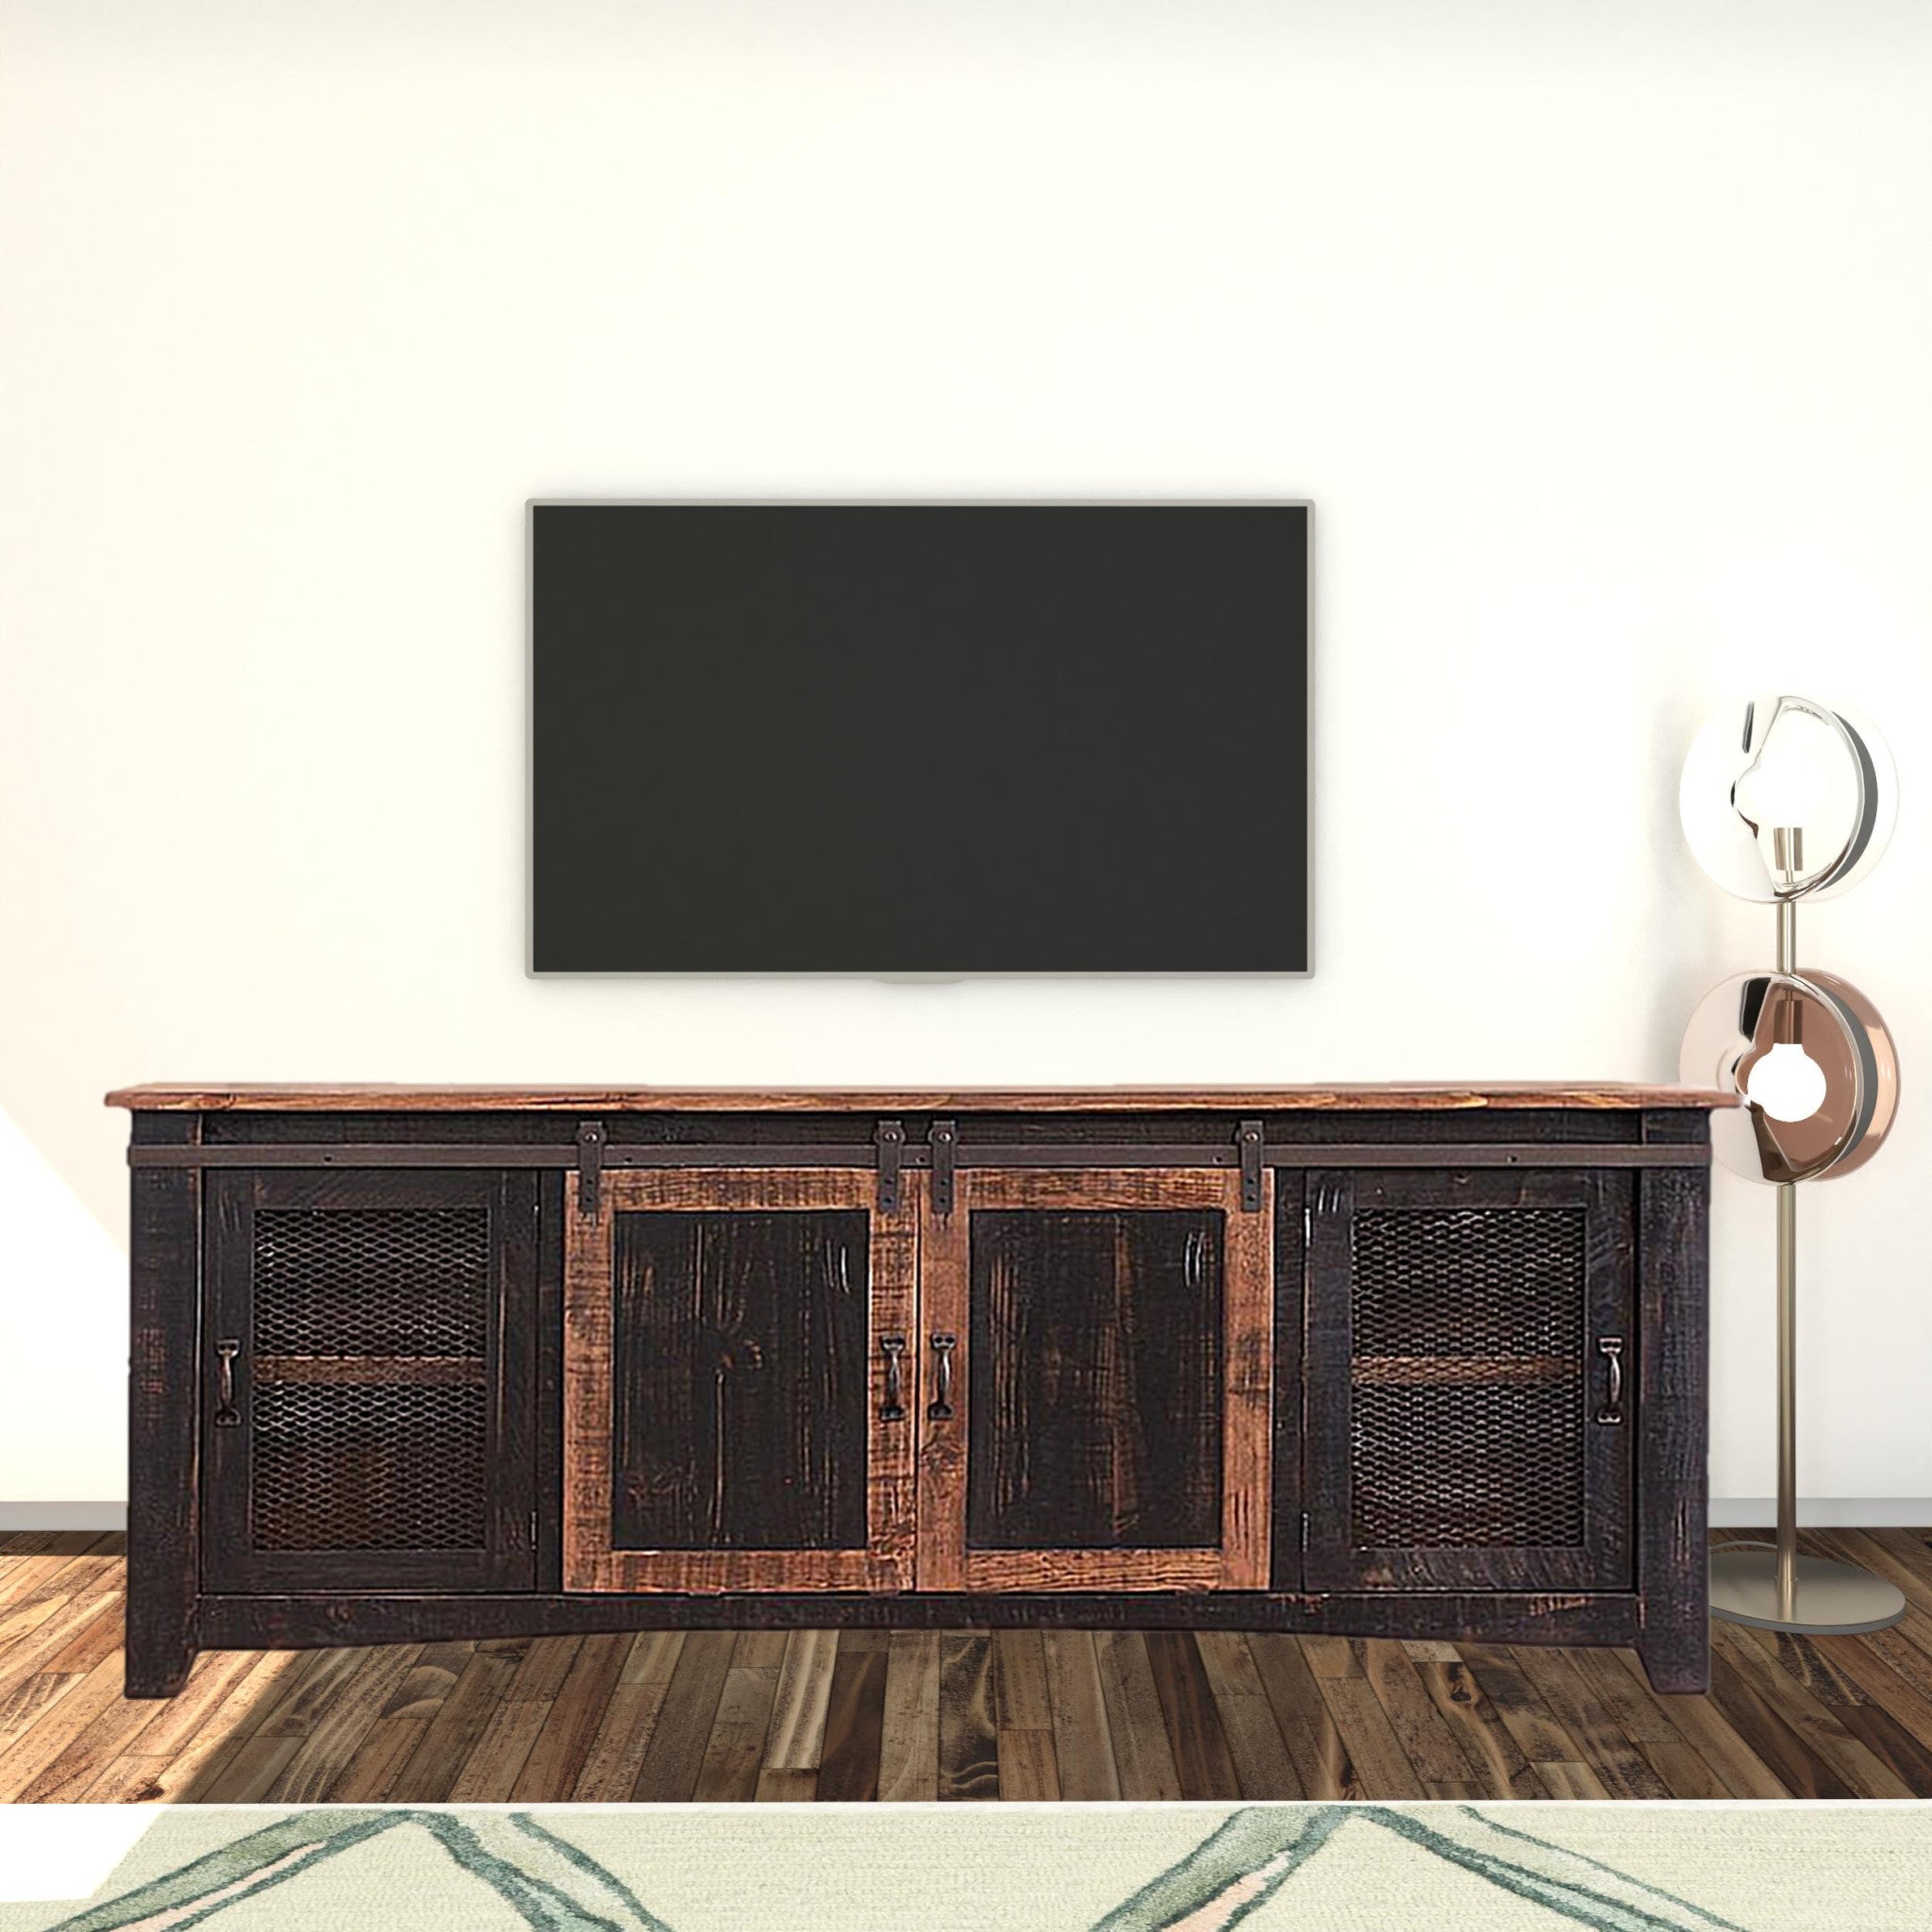 79" Black Solid Wood Cabinet Enclosed Storage Distressed TV Stand